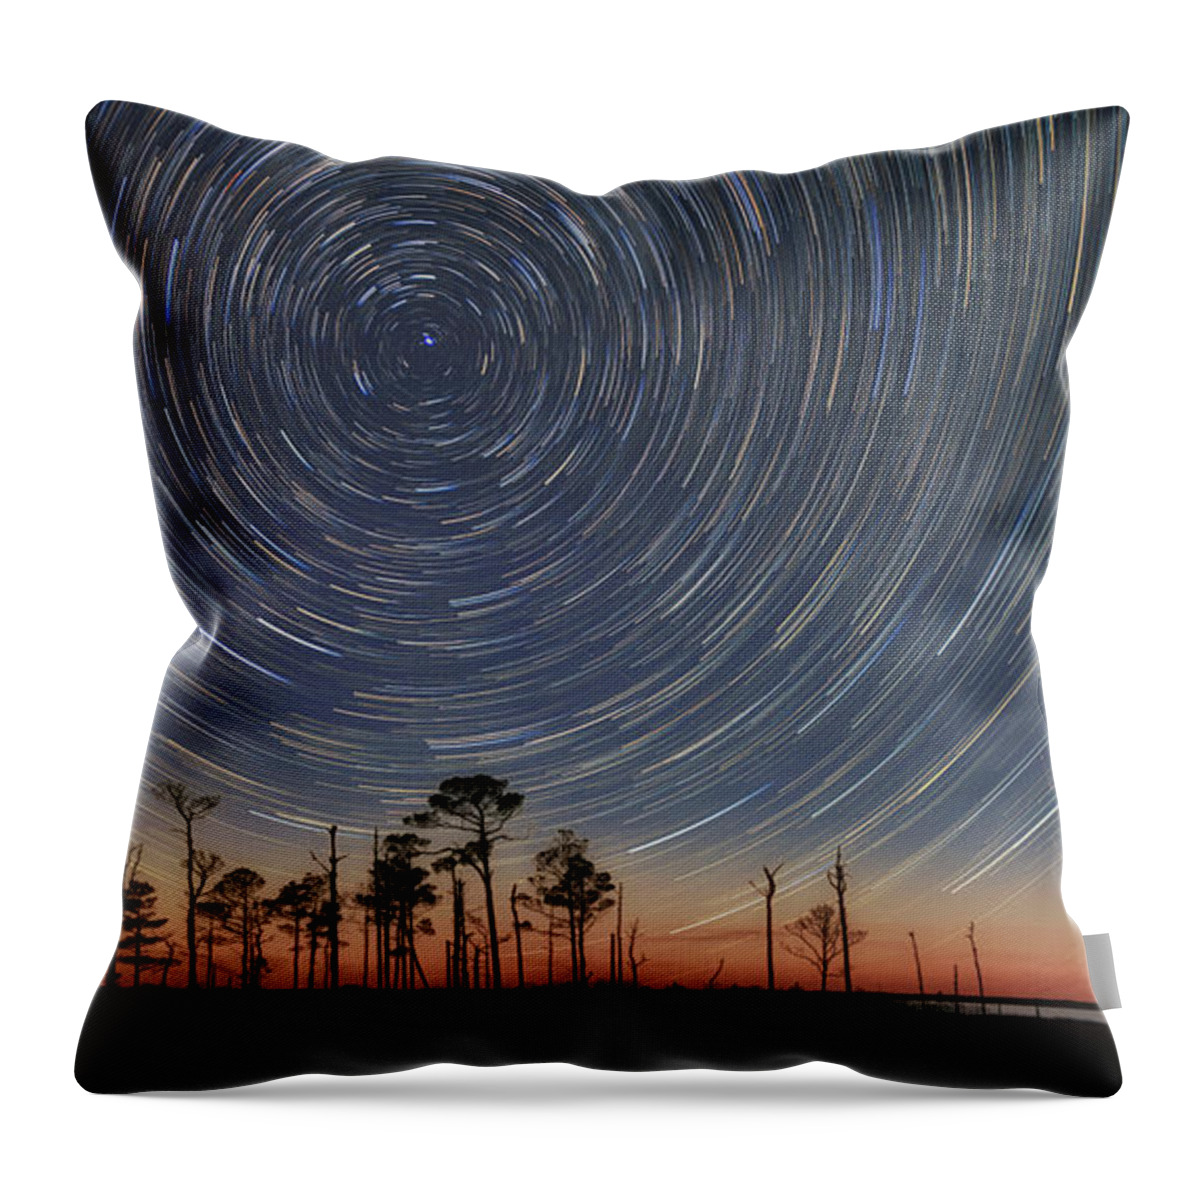 Maryland Throw Pillow featuring the photograph Out For A Spin 2 by Robert Fawcett